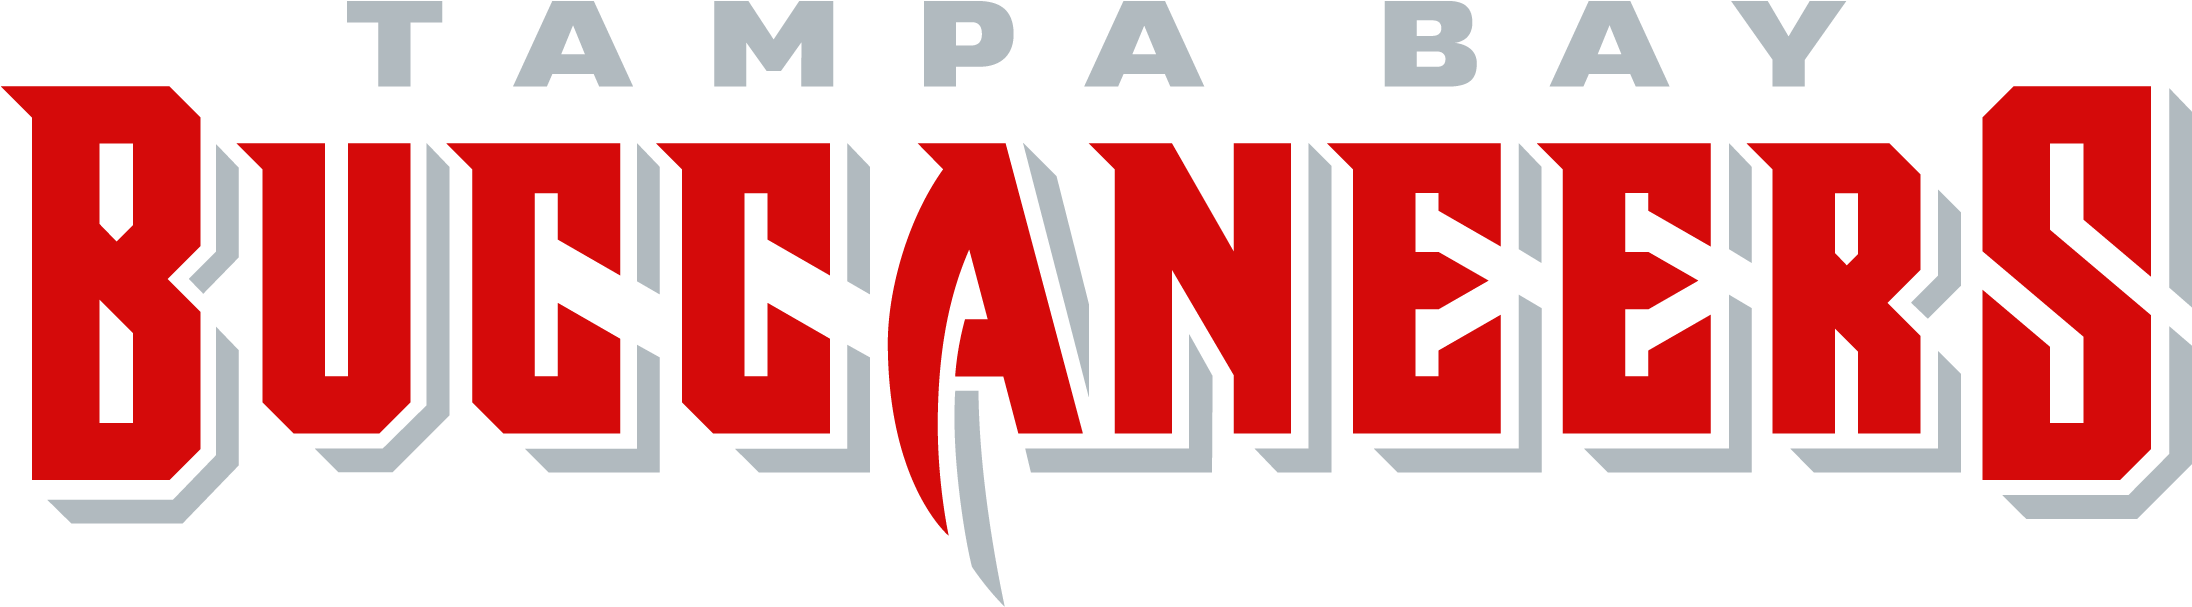 Open - Tampa Bay Buccaneers Logo Png - Free Transparent PNG Download